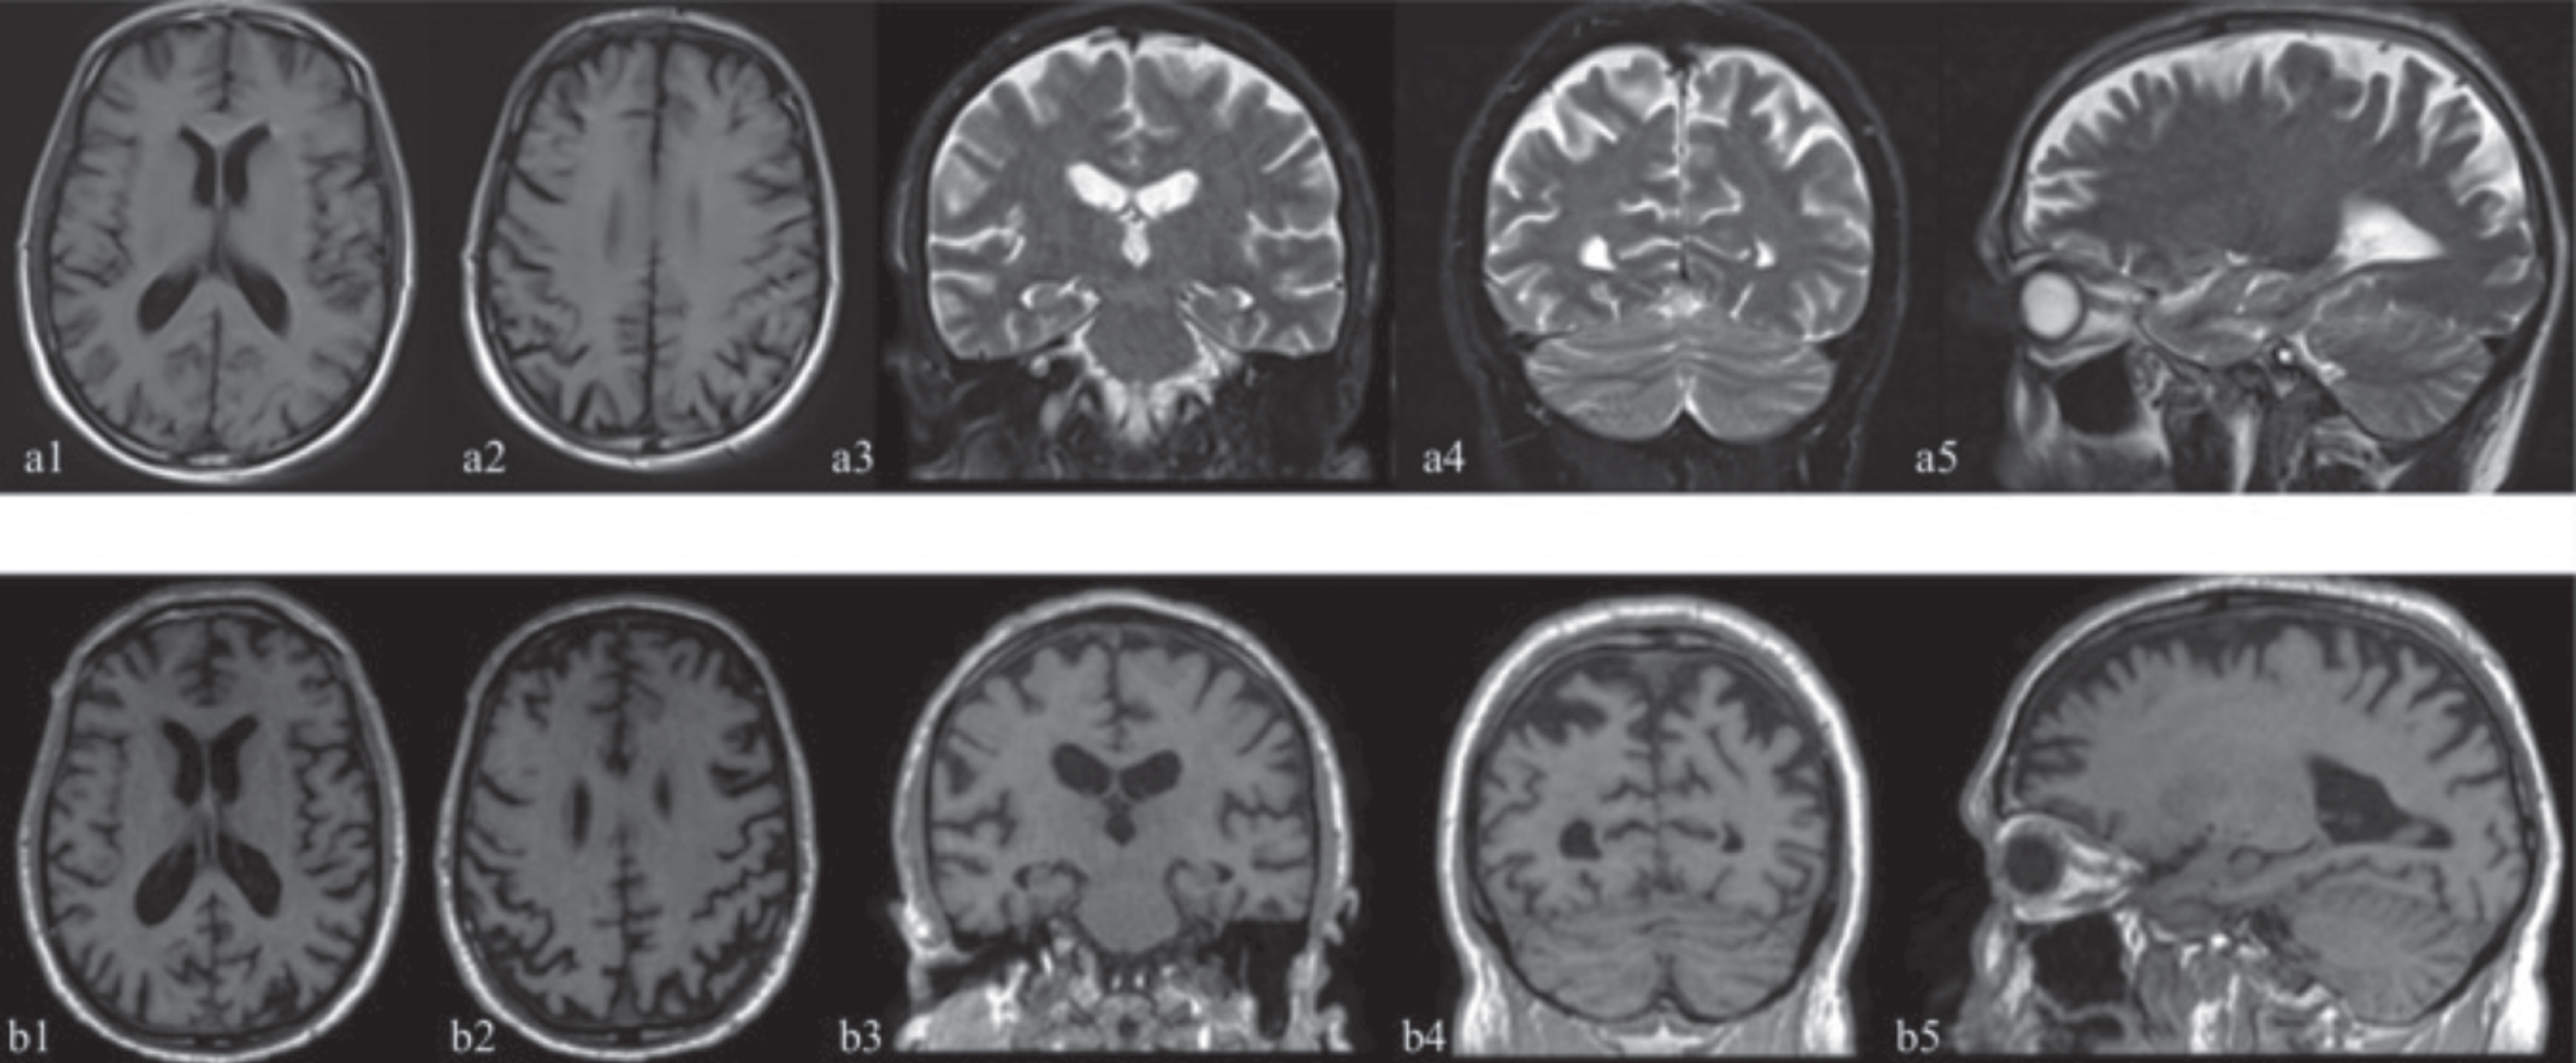 The first MRI study (January 12, 2019) is illustrated by the images above (a1-a5) while the second study (December 22, 2020) produced the images below (b1-b5). (a1, a2, b1, b2 axial sections; a3, a4, b3, b4 coronal sections; a5, b5 sagittal sections). Not available T1 sequences in the first study in the coronal and sagittal projections. Structural MRI T1 and T2 weighted sequences reported subarachnoid spaces of the vault enlarged in the fronto-parietal region (b1, b2, a3, b3, a5, b5), anterior (b2, a5, b5) and posterior cortical atrophy especially in the higher sections (a2, b2, a4, b4) and minimal gliotic alterations within the right-hemisphere’s white matter. The hippocampus and the mesial temporal area appear fairly preserved (a3, b3). The comparison between the two studies shows an increase in frontal (b2) and posterior (b2, b4) atrophy after 23 months.